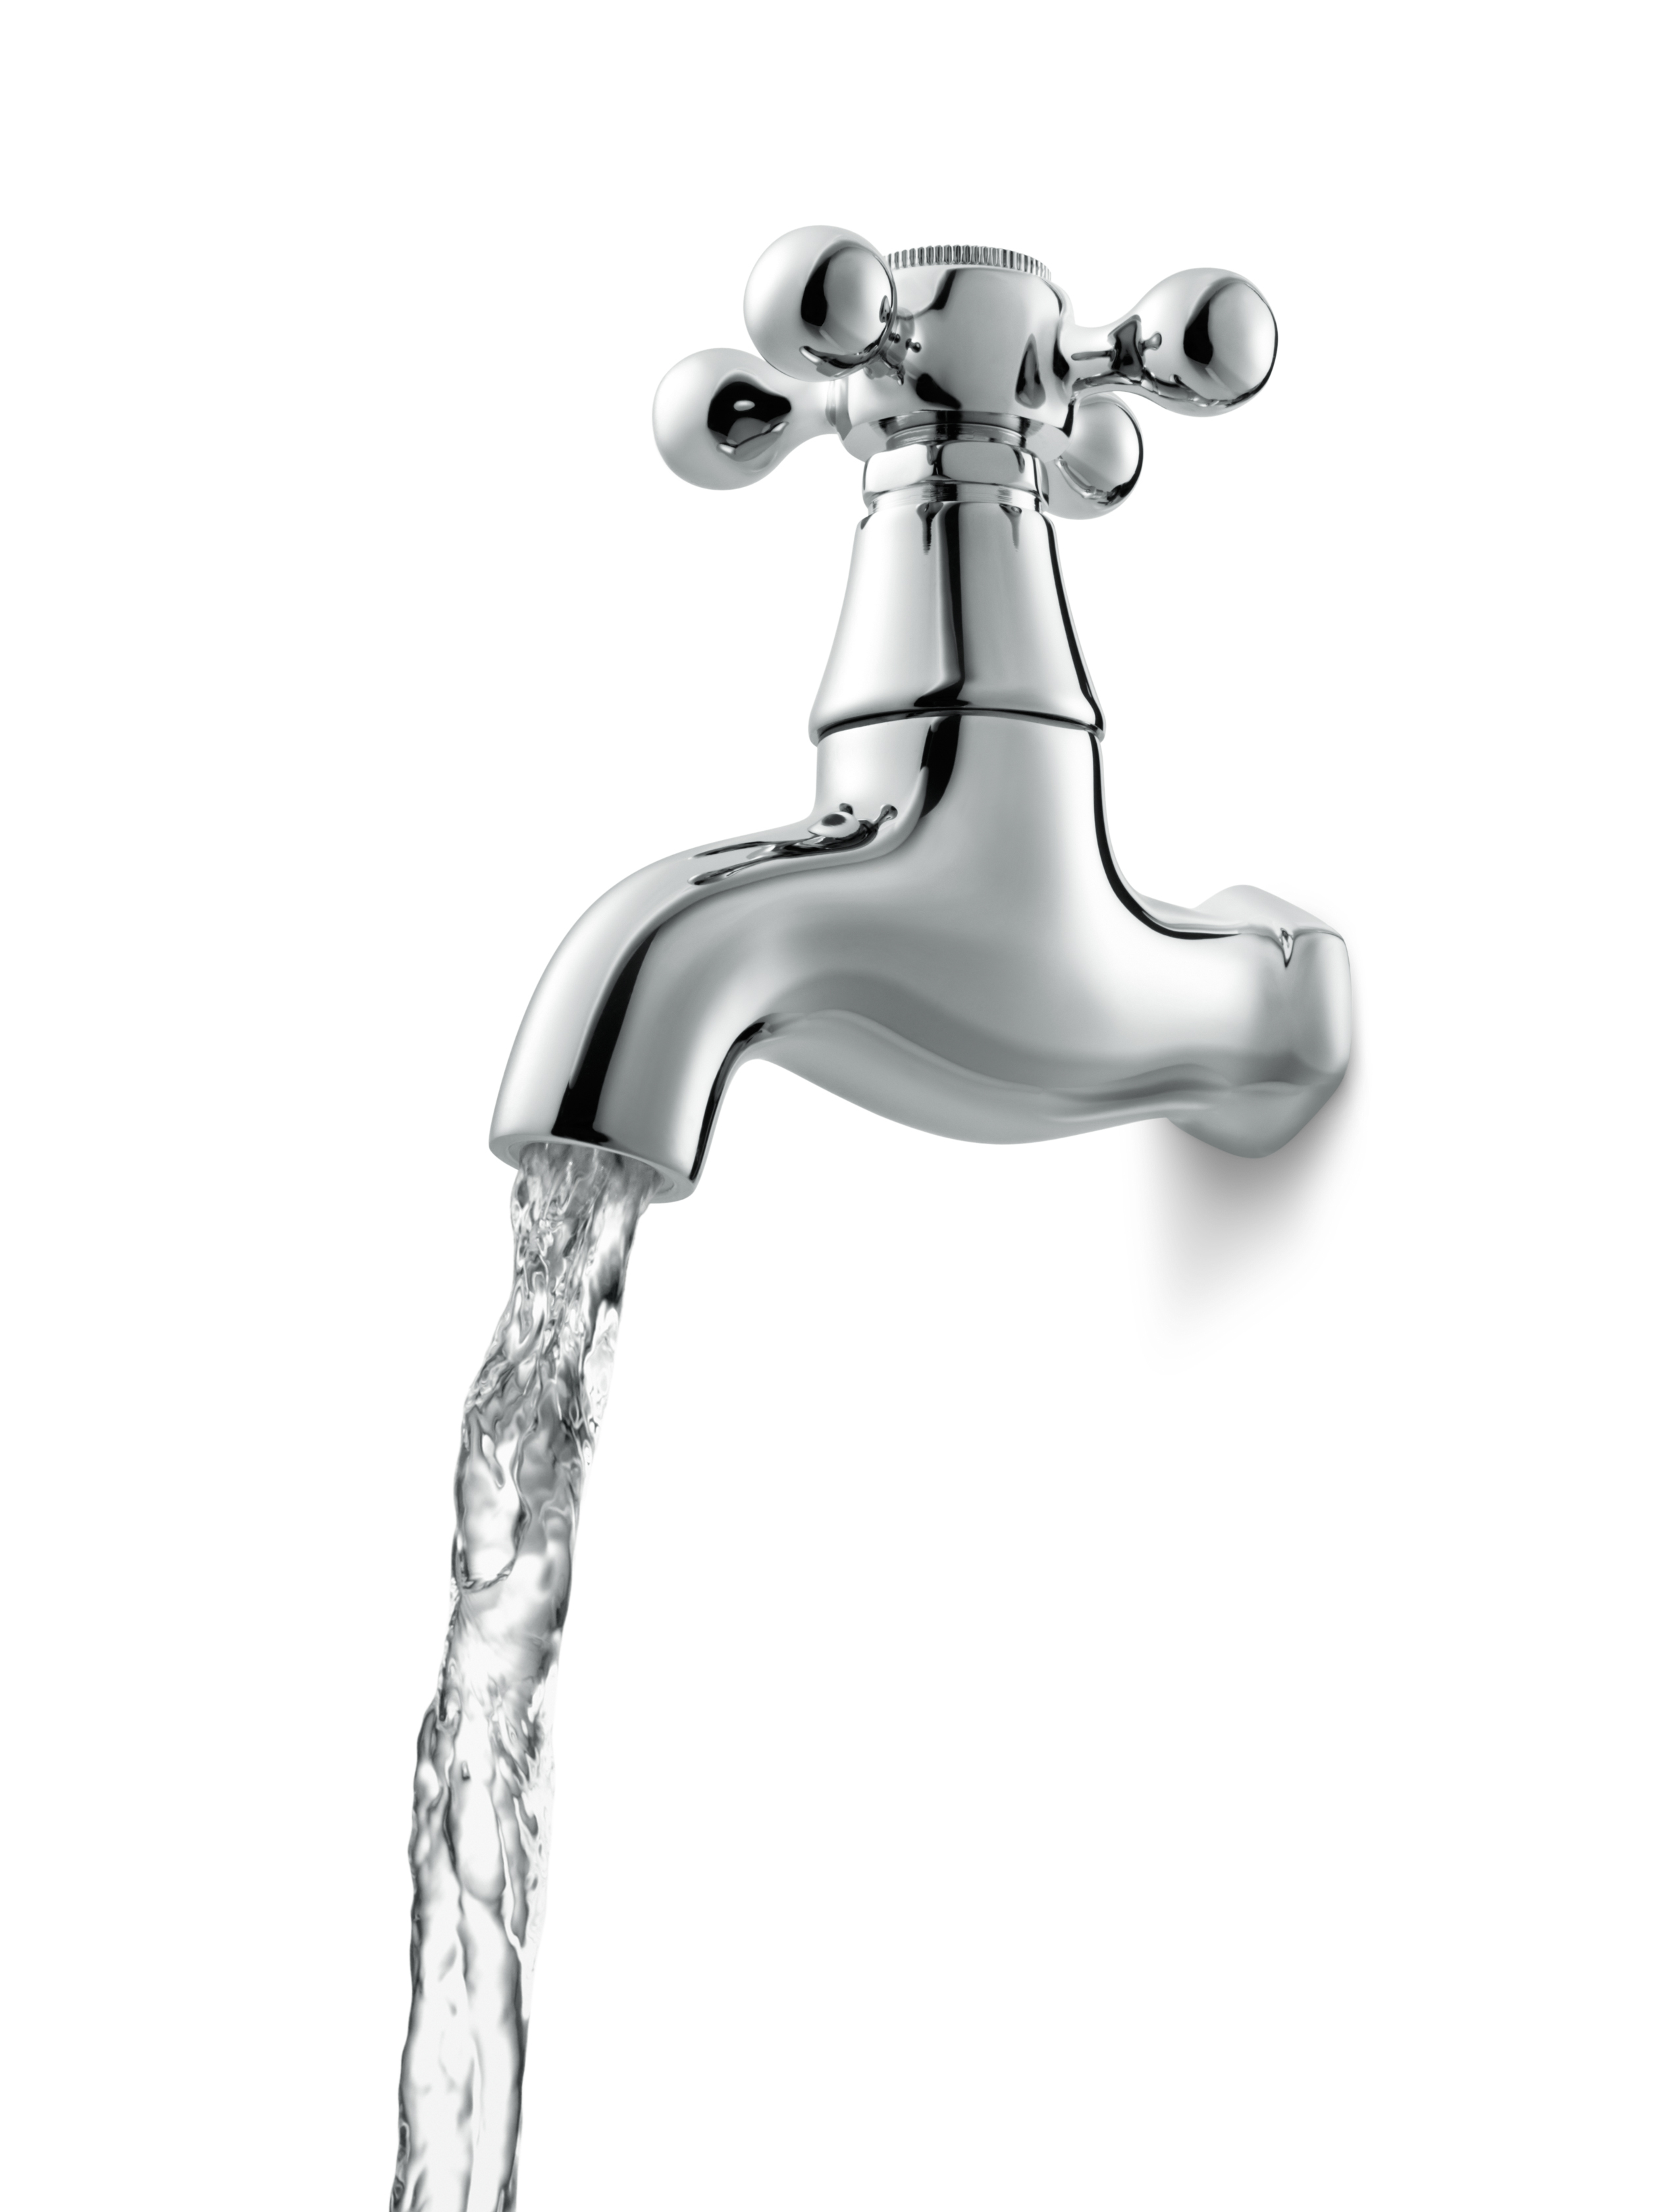 free vector Water tap